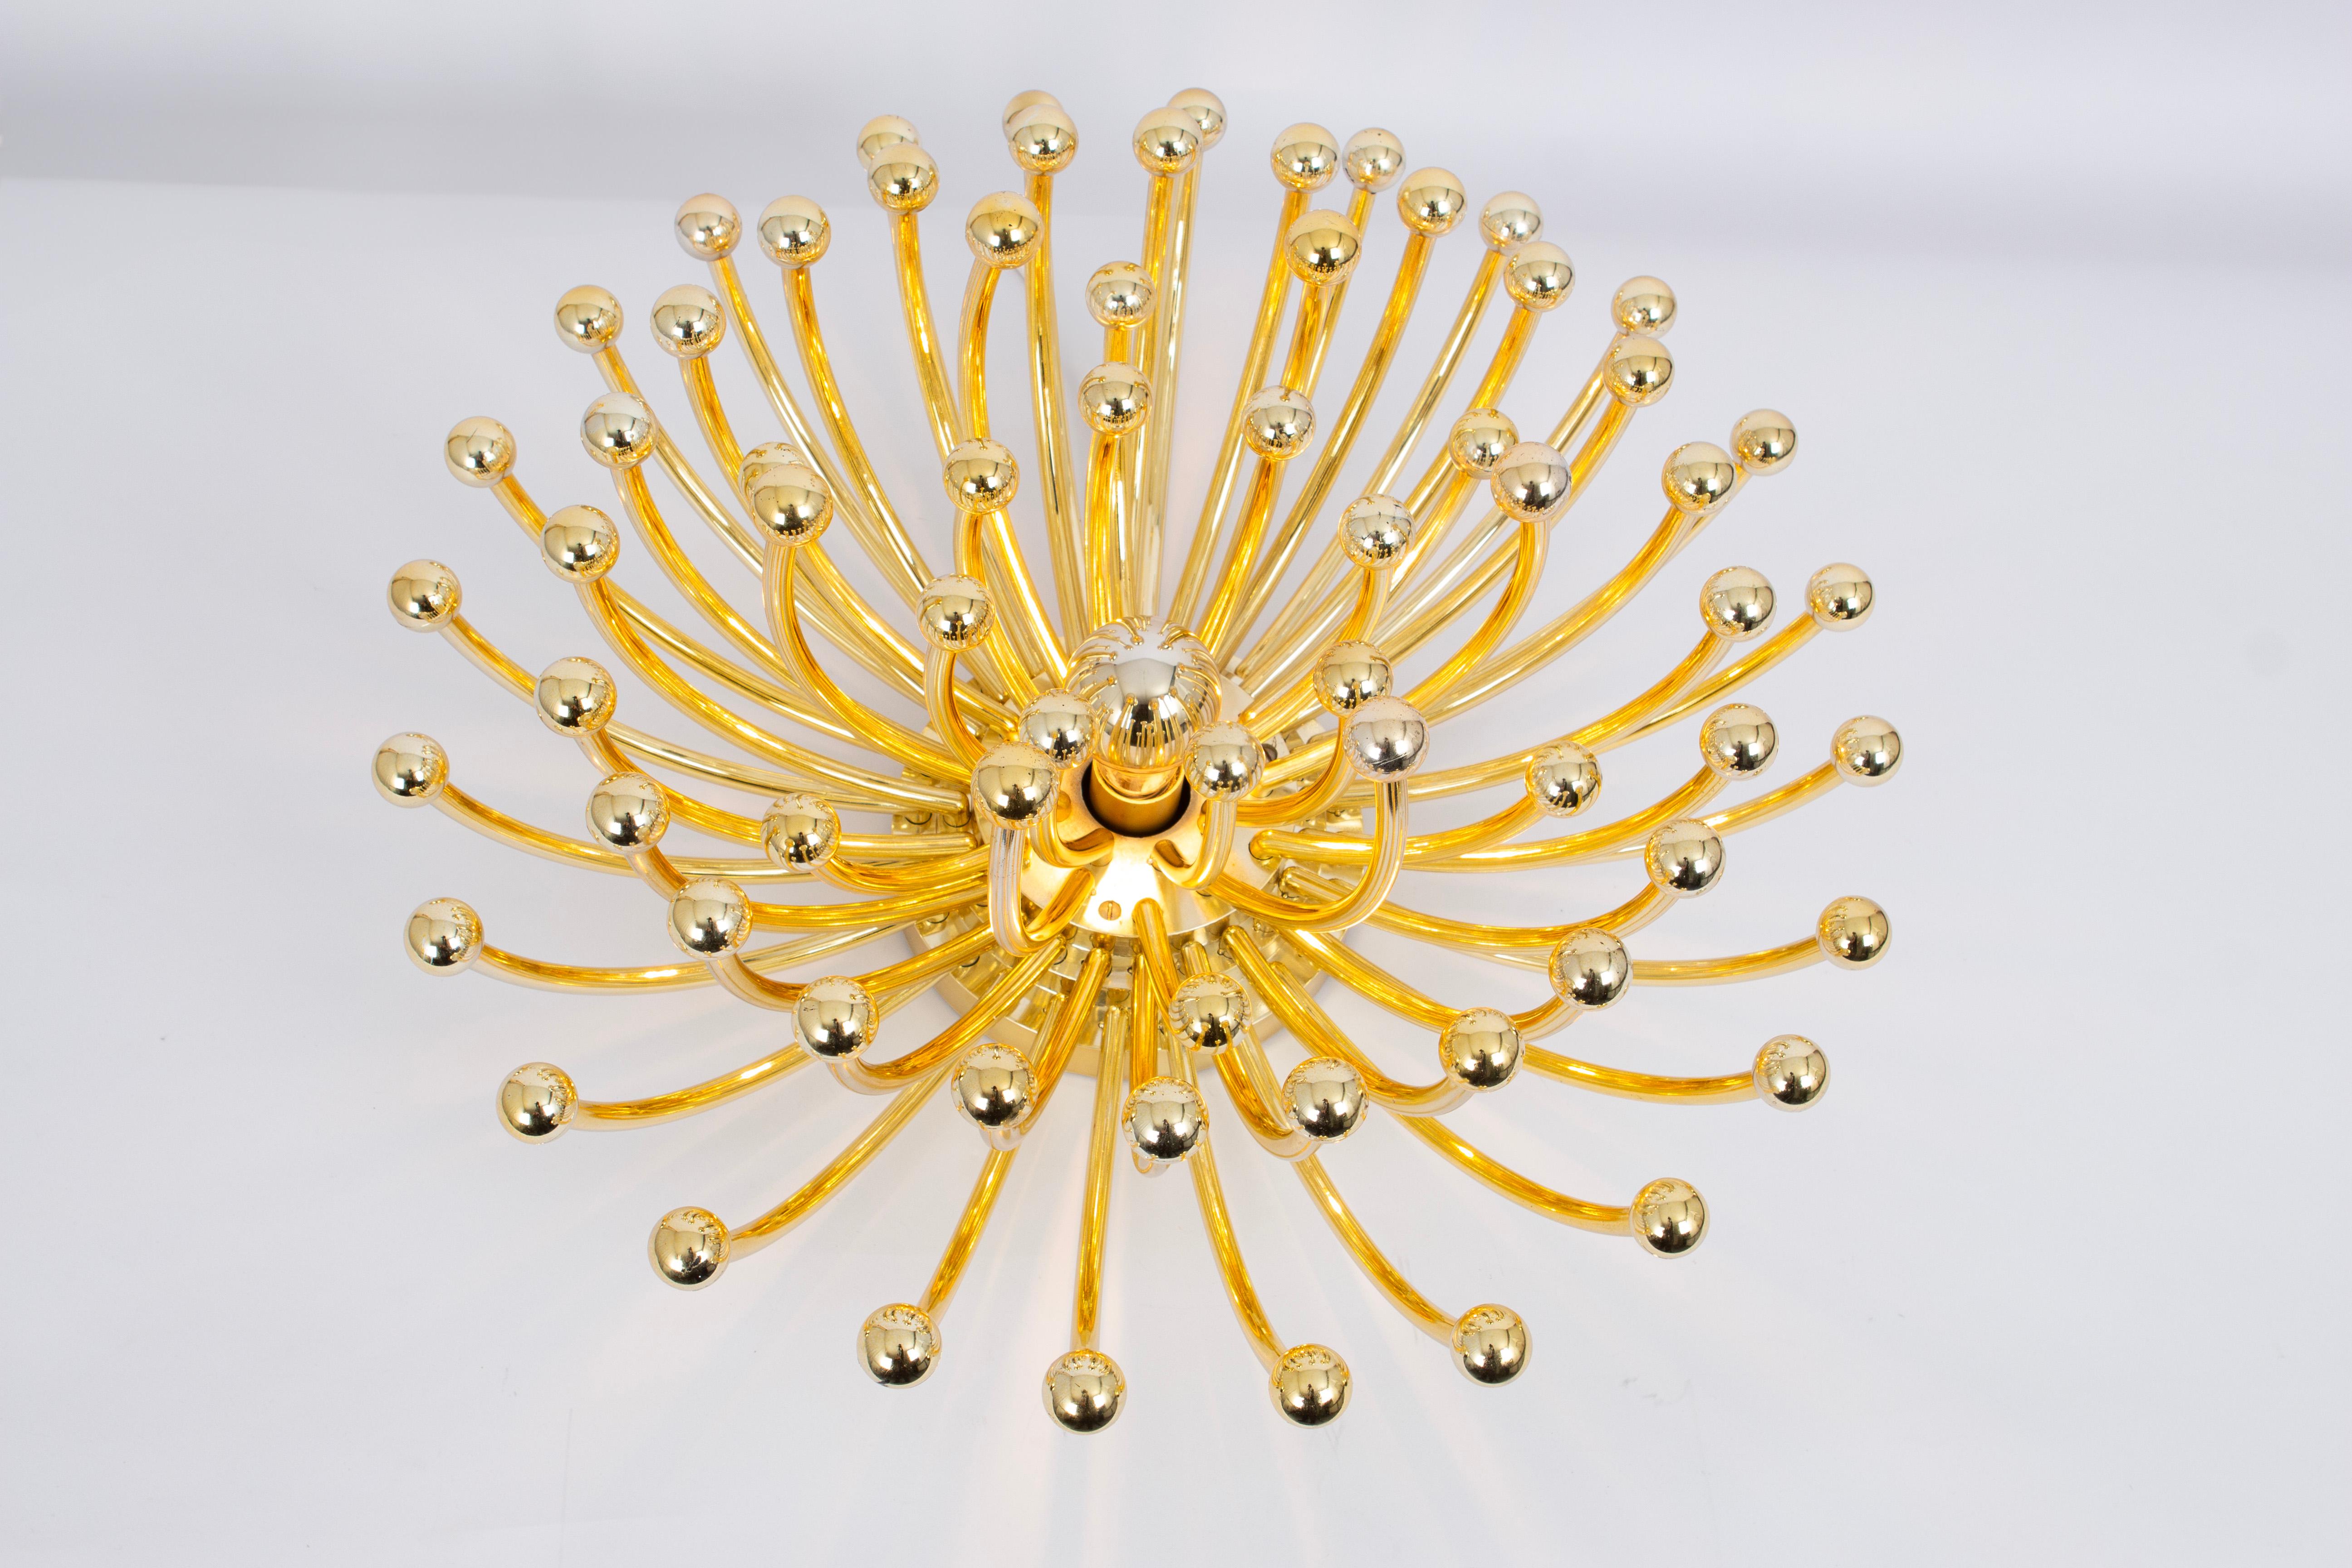 Large Pistillino Ceiling Light by Valenti Luce for Studio Tetrarch, 1970s For Sale 4